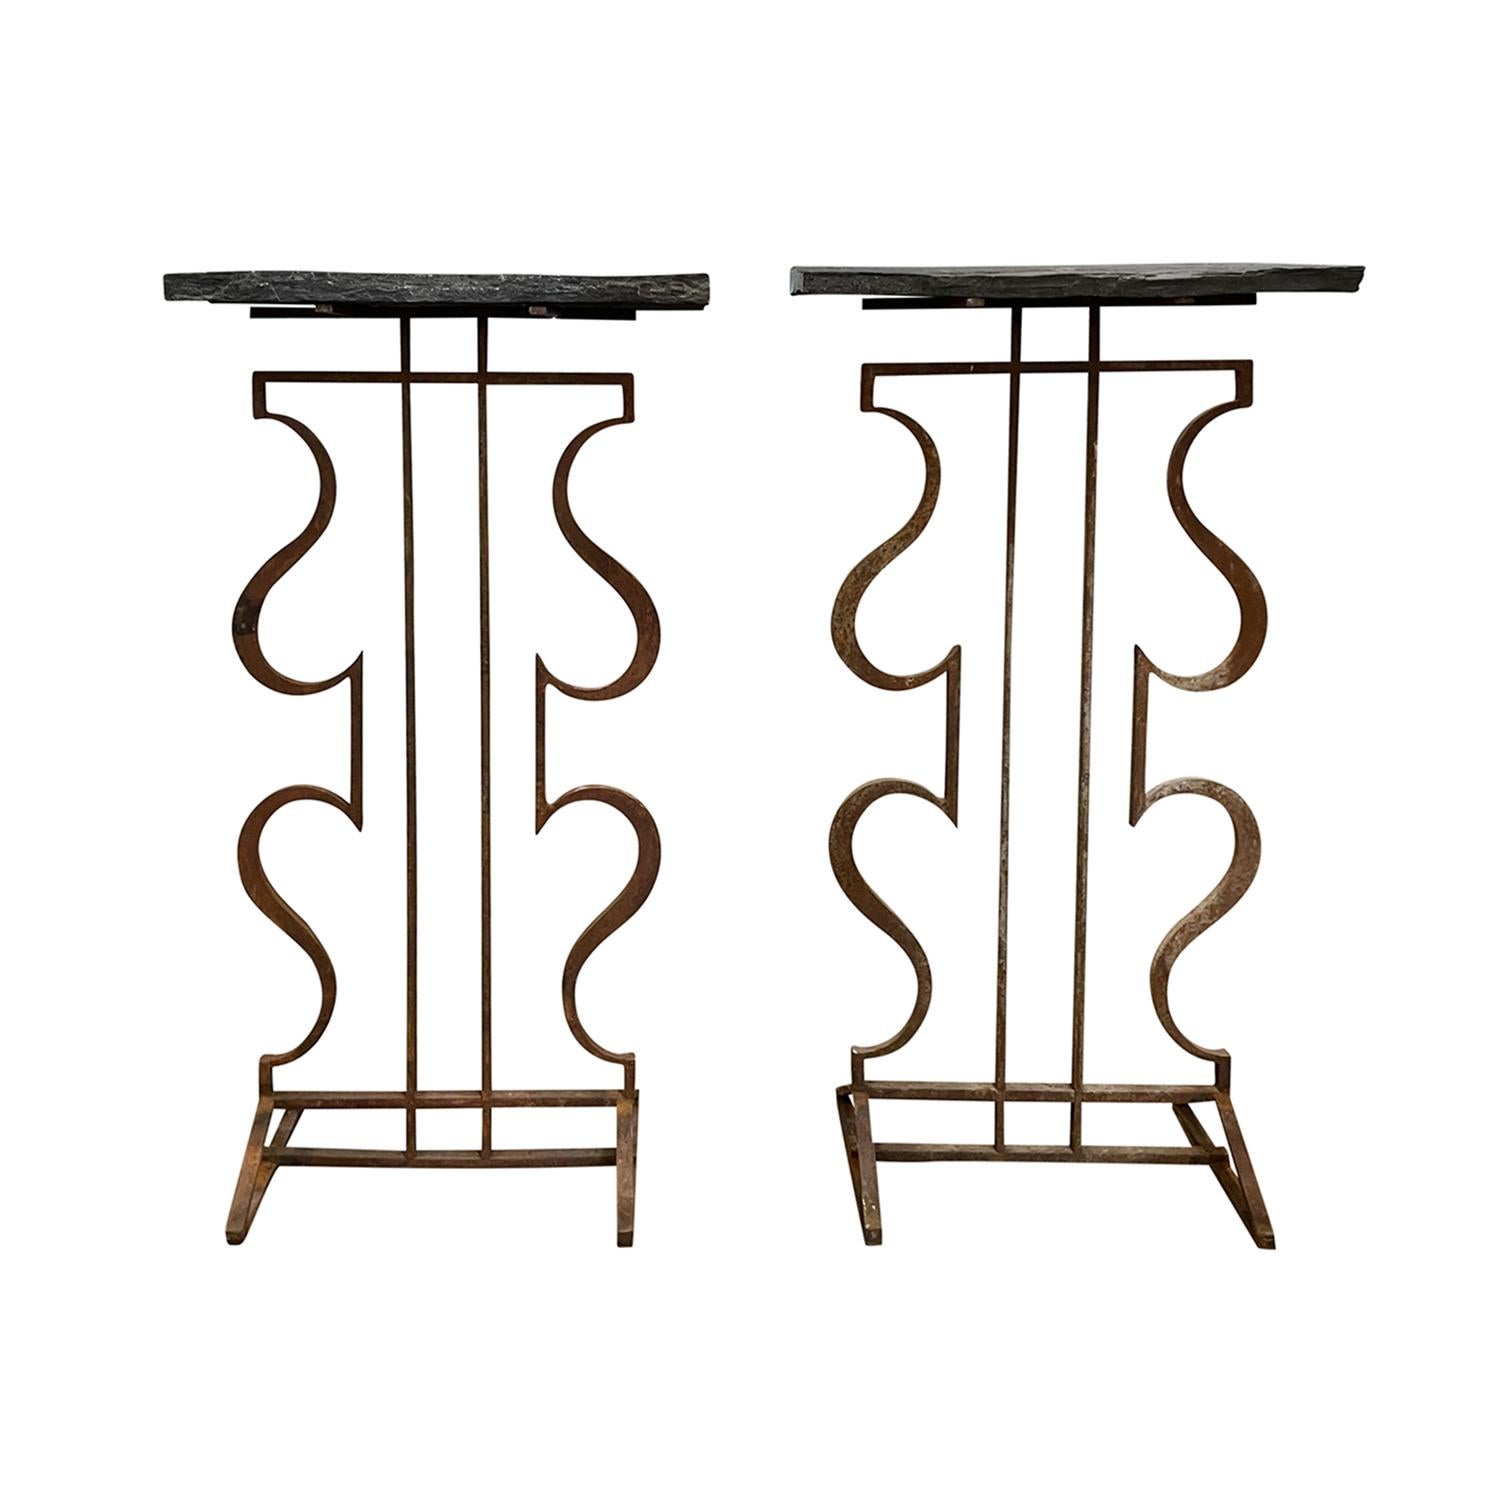 A vintage French pair of rustic console tables featuring heavy slate tops with rough edges, in good condition. The freestanding end tables are supported by elegantly curved hand-forged iron bases. Suitable for both indoor and outdoor use, these